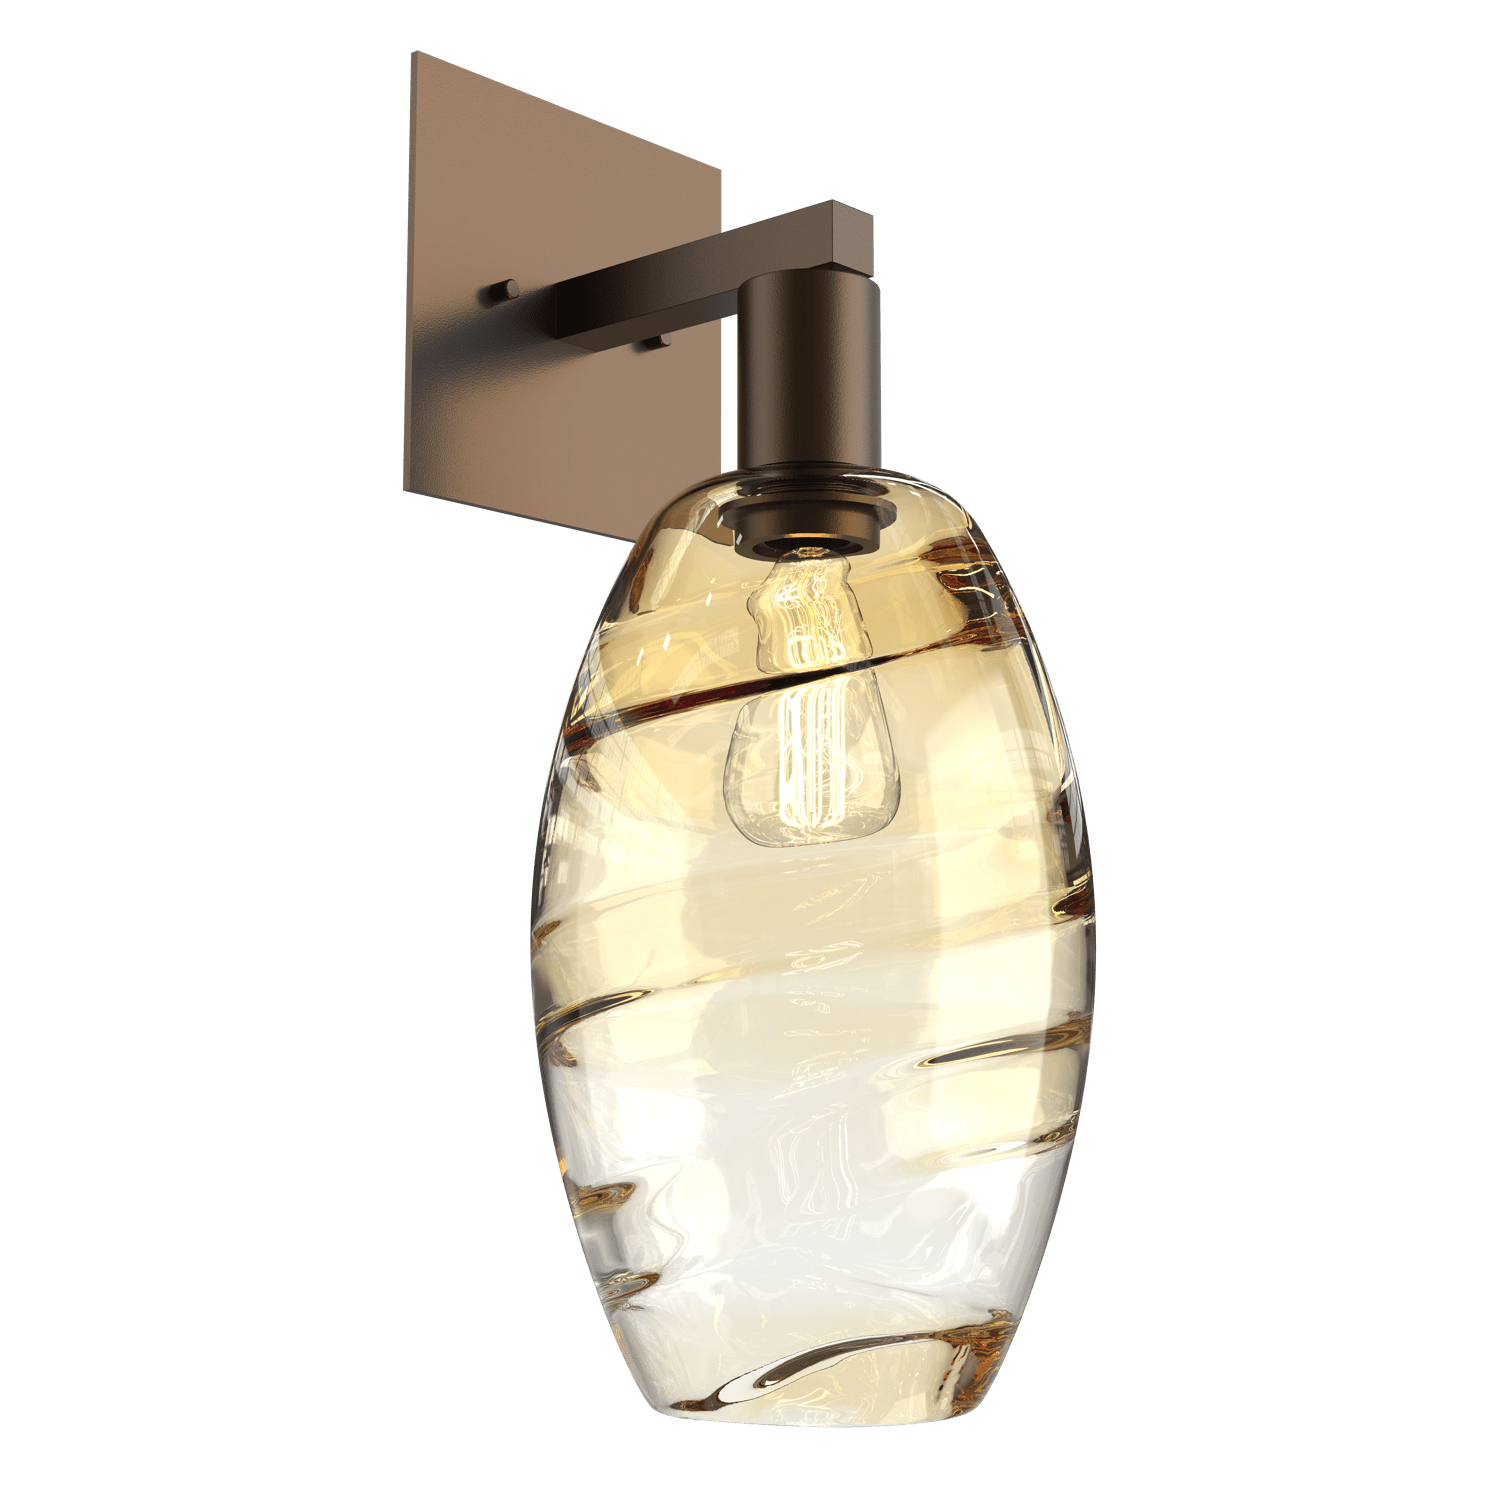 IDB0035-16-FB-OA-Hammerton-Studio-Optic-Blown-Glass-Elisse-wall-sconce-with-flat-bronze-finish-and-optic-amber-blown-glass-shades-and-incandescent-lamping